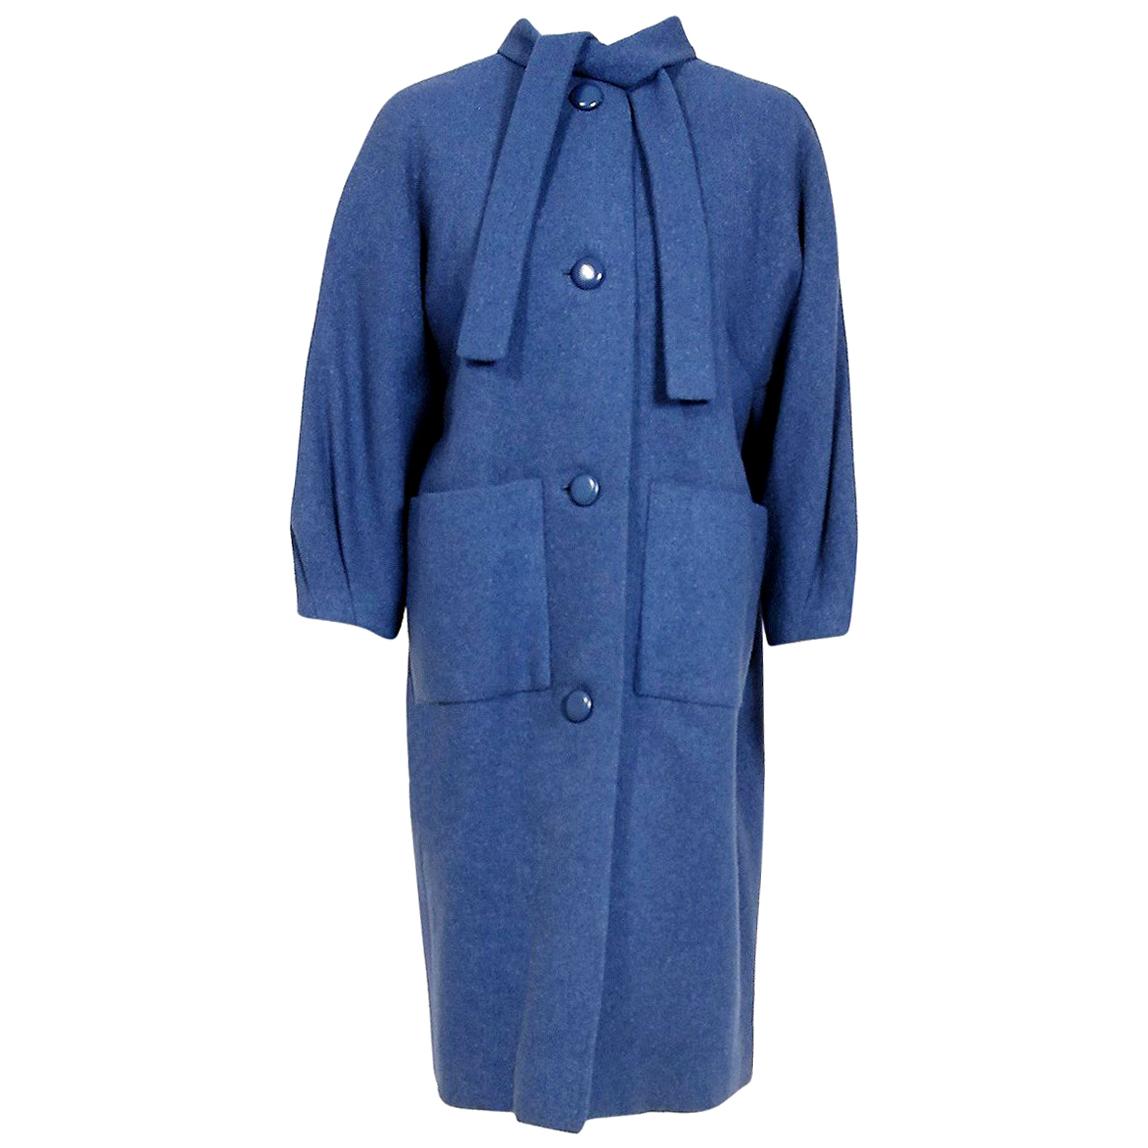 Vintage 1958 Yves Saint Laurent for Christian Dior Couture Documented Blue Coat